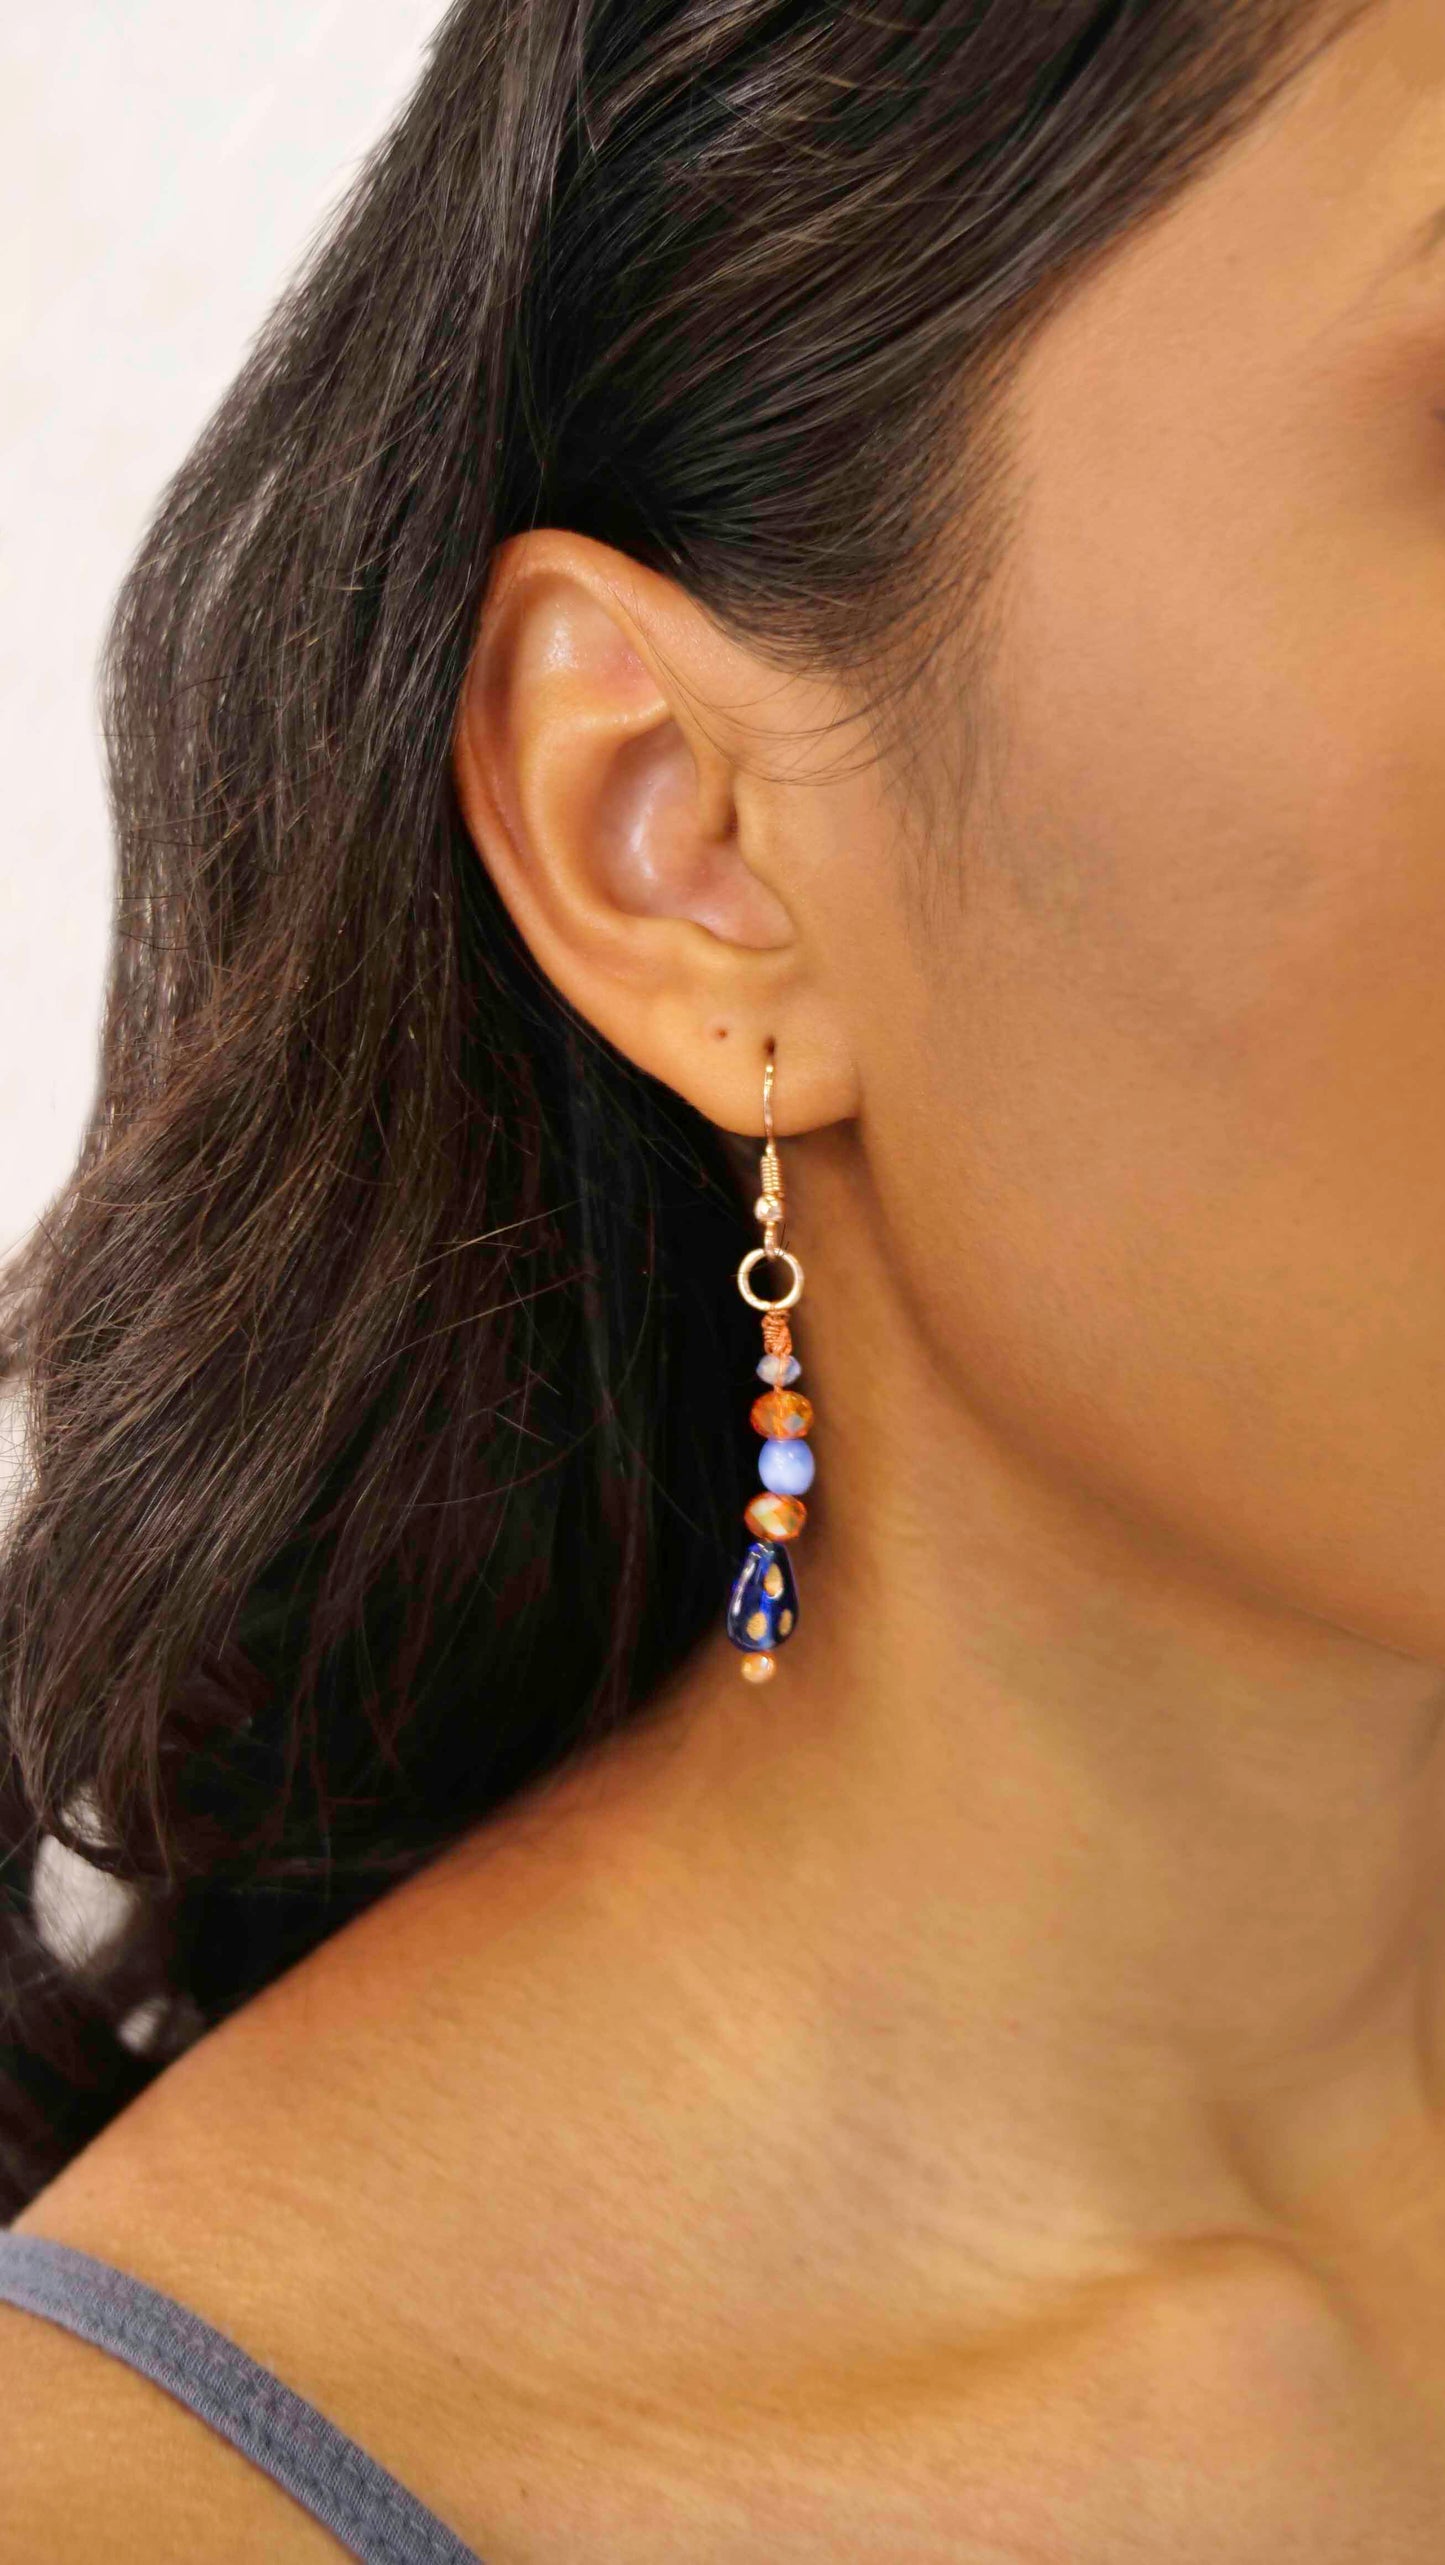 A handmade orange and blue crystal beaded pair of dangle drop earrings with blue glass charms.